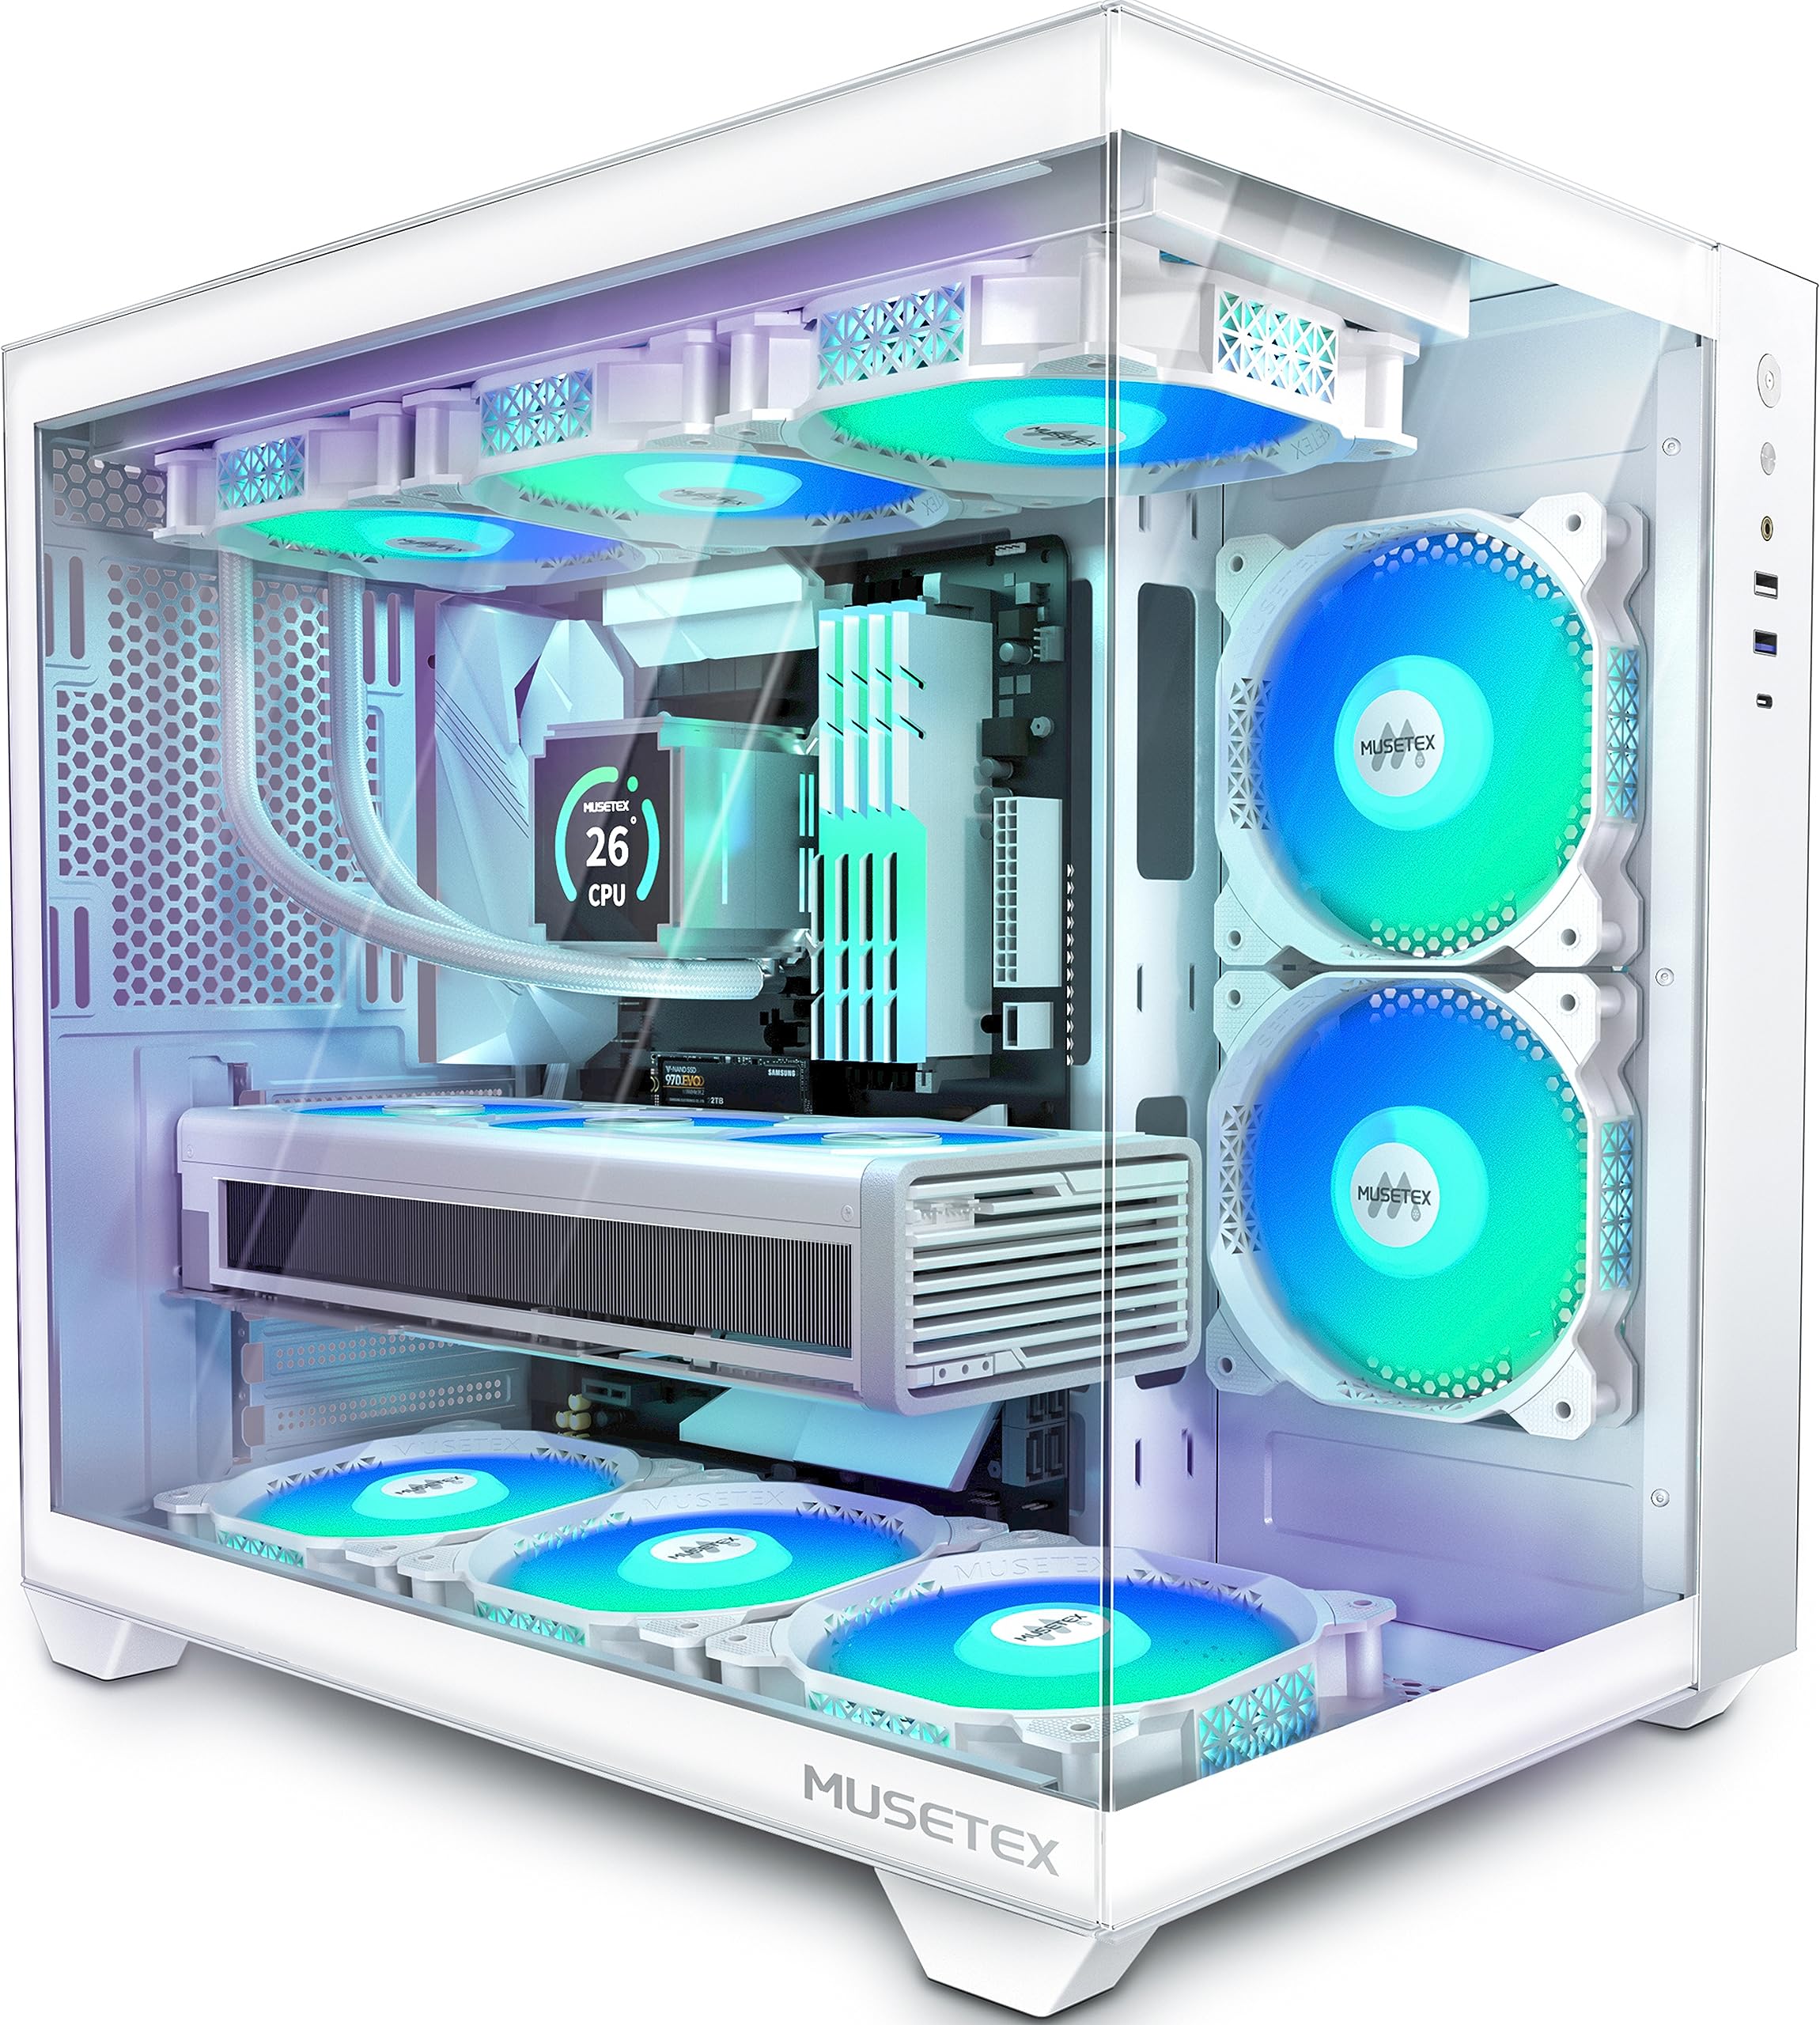 MUSETEX ATX PC Case,5 PWM ARGB Fans Pre-Installed,360MM RAD Support,Type-C Gaming PC Case,270° Full View Tempered Glass Mid Tower PC Case,Pure White ATX Computer Case,Y6